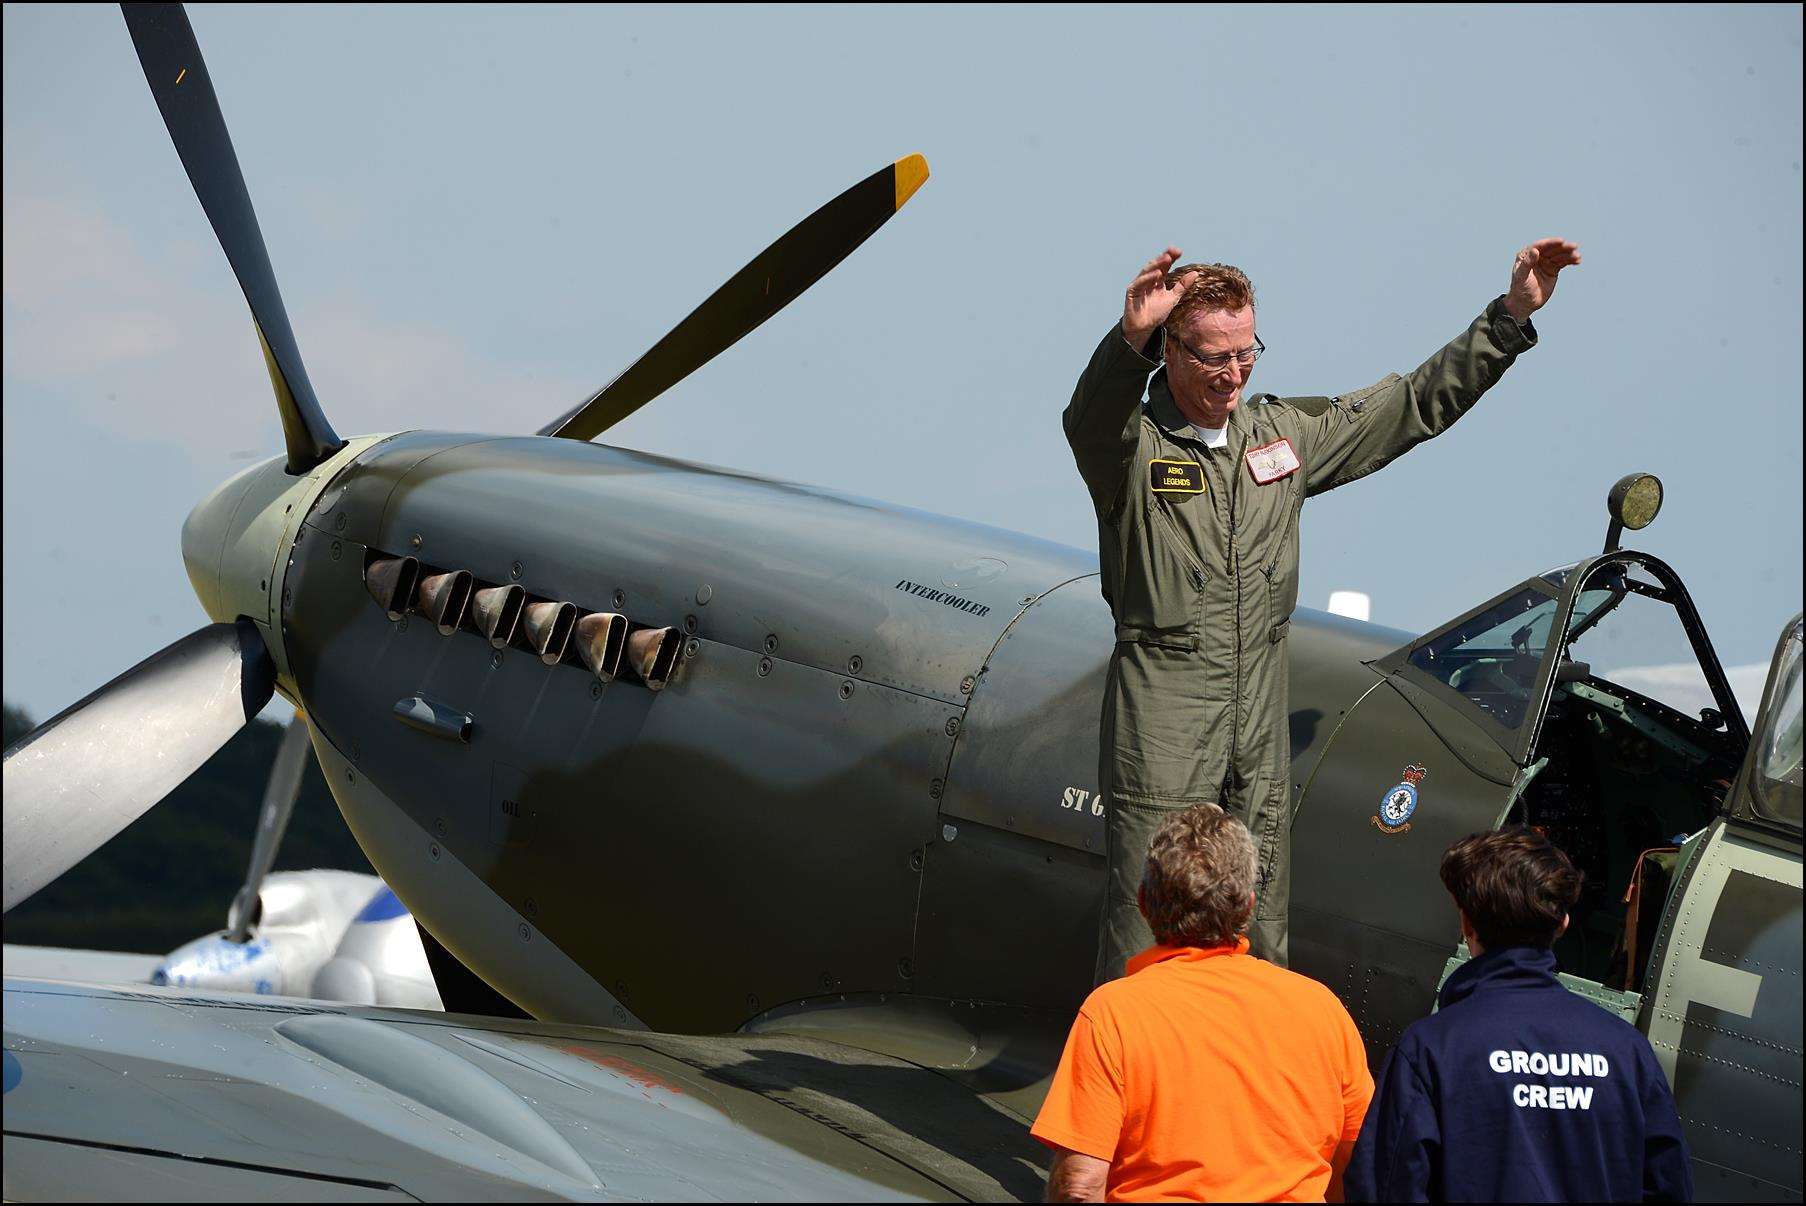 Battle of Britain Air Show featuring Aero Flt Lt Antony Parkinson MBE, known as Parky